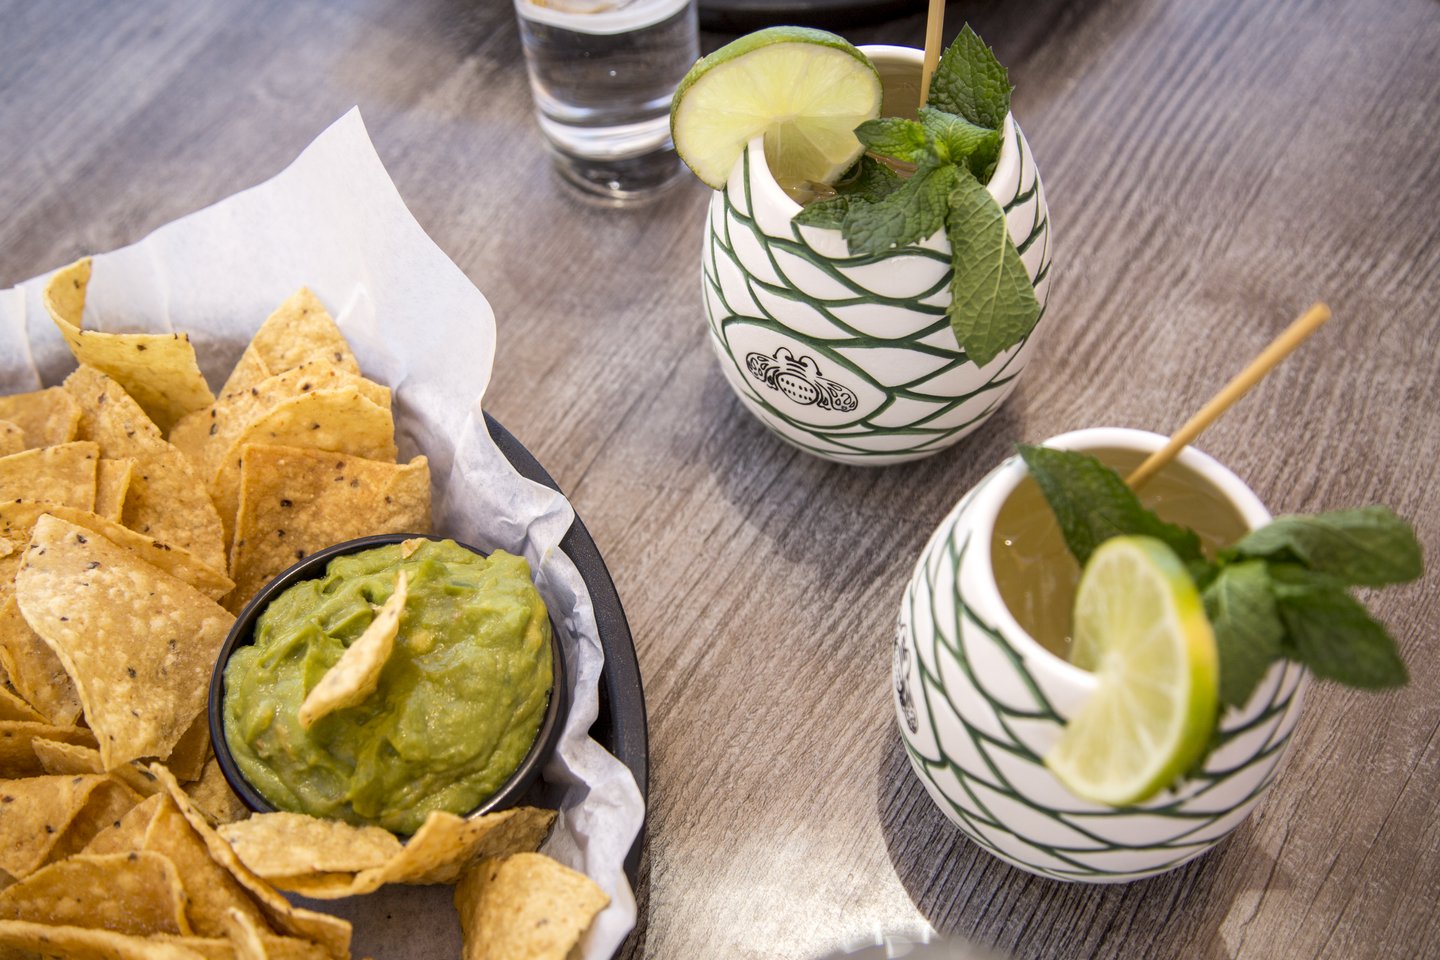 Santa Fe Cuisine, two margaritas with chips and guacamole